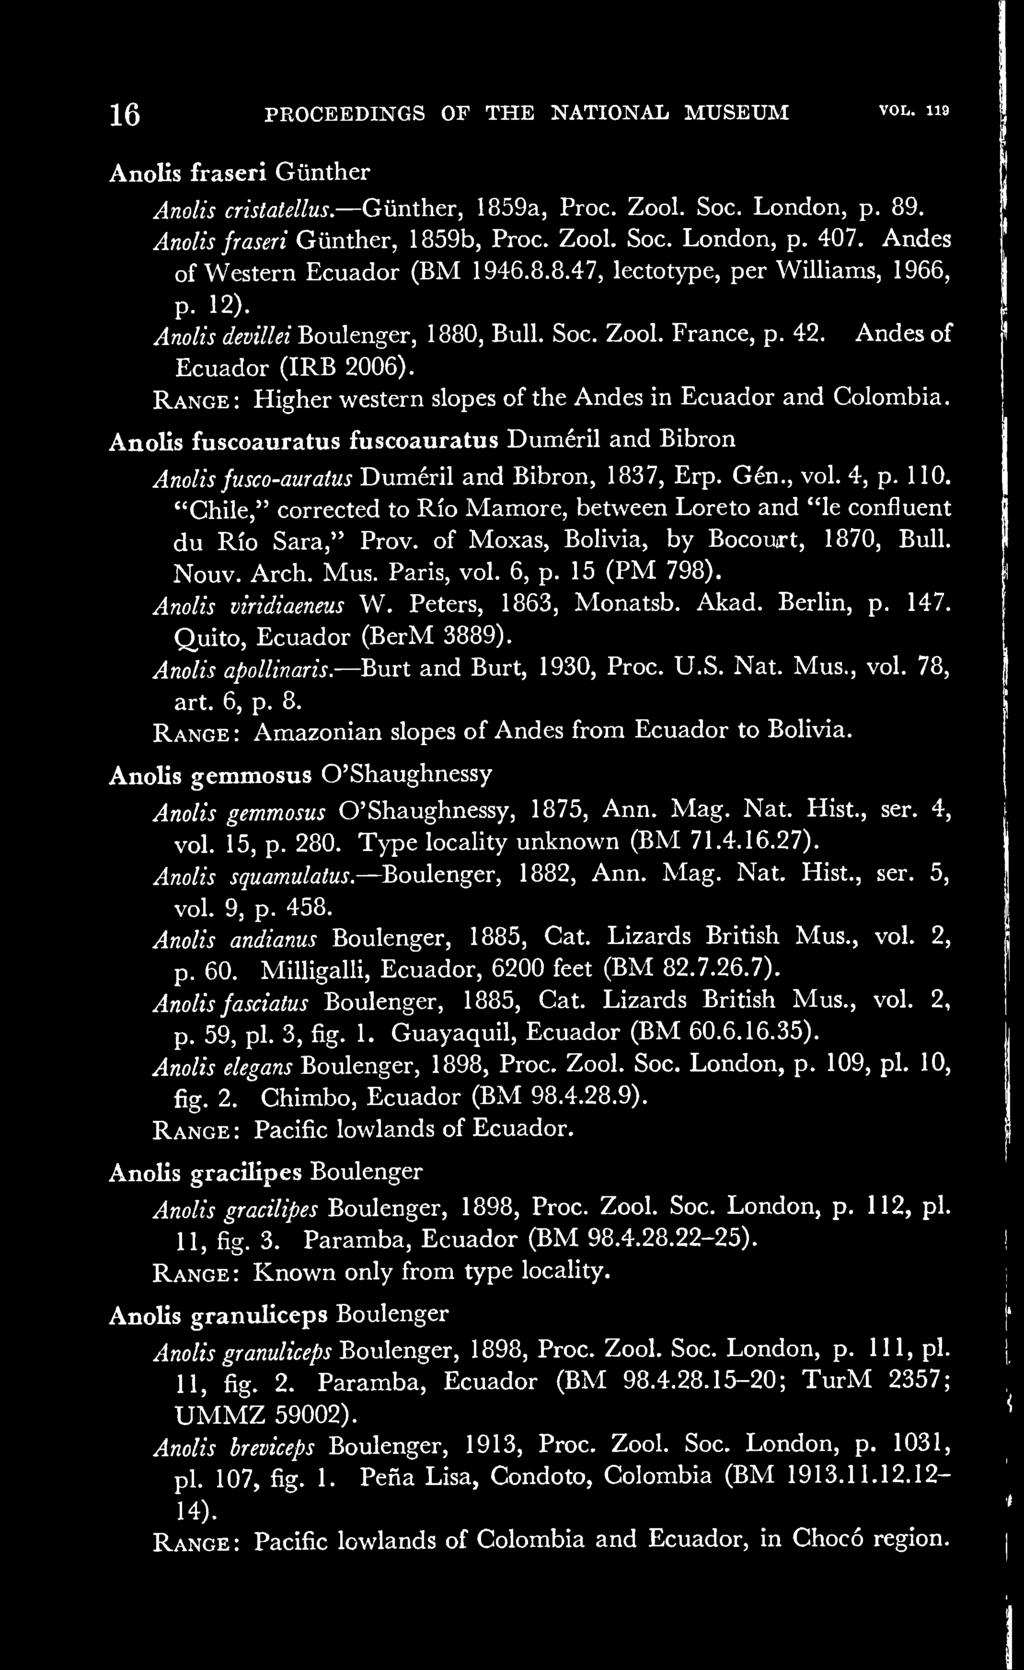 Range: Higher western slopes of the Andes in Ecuador and Colombia. Anolis fuscoauratus fuscoauratus Dumeril and Bibron Anolis fusco-auratus Dumeril and Bibron, 1837, Erp. Gen., vol. 4, p. 110.